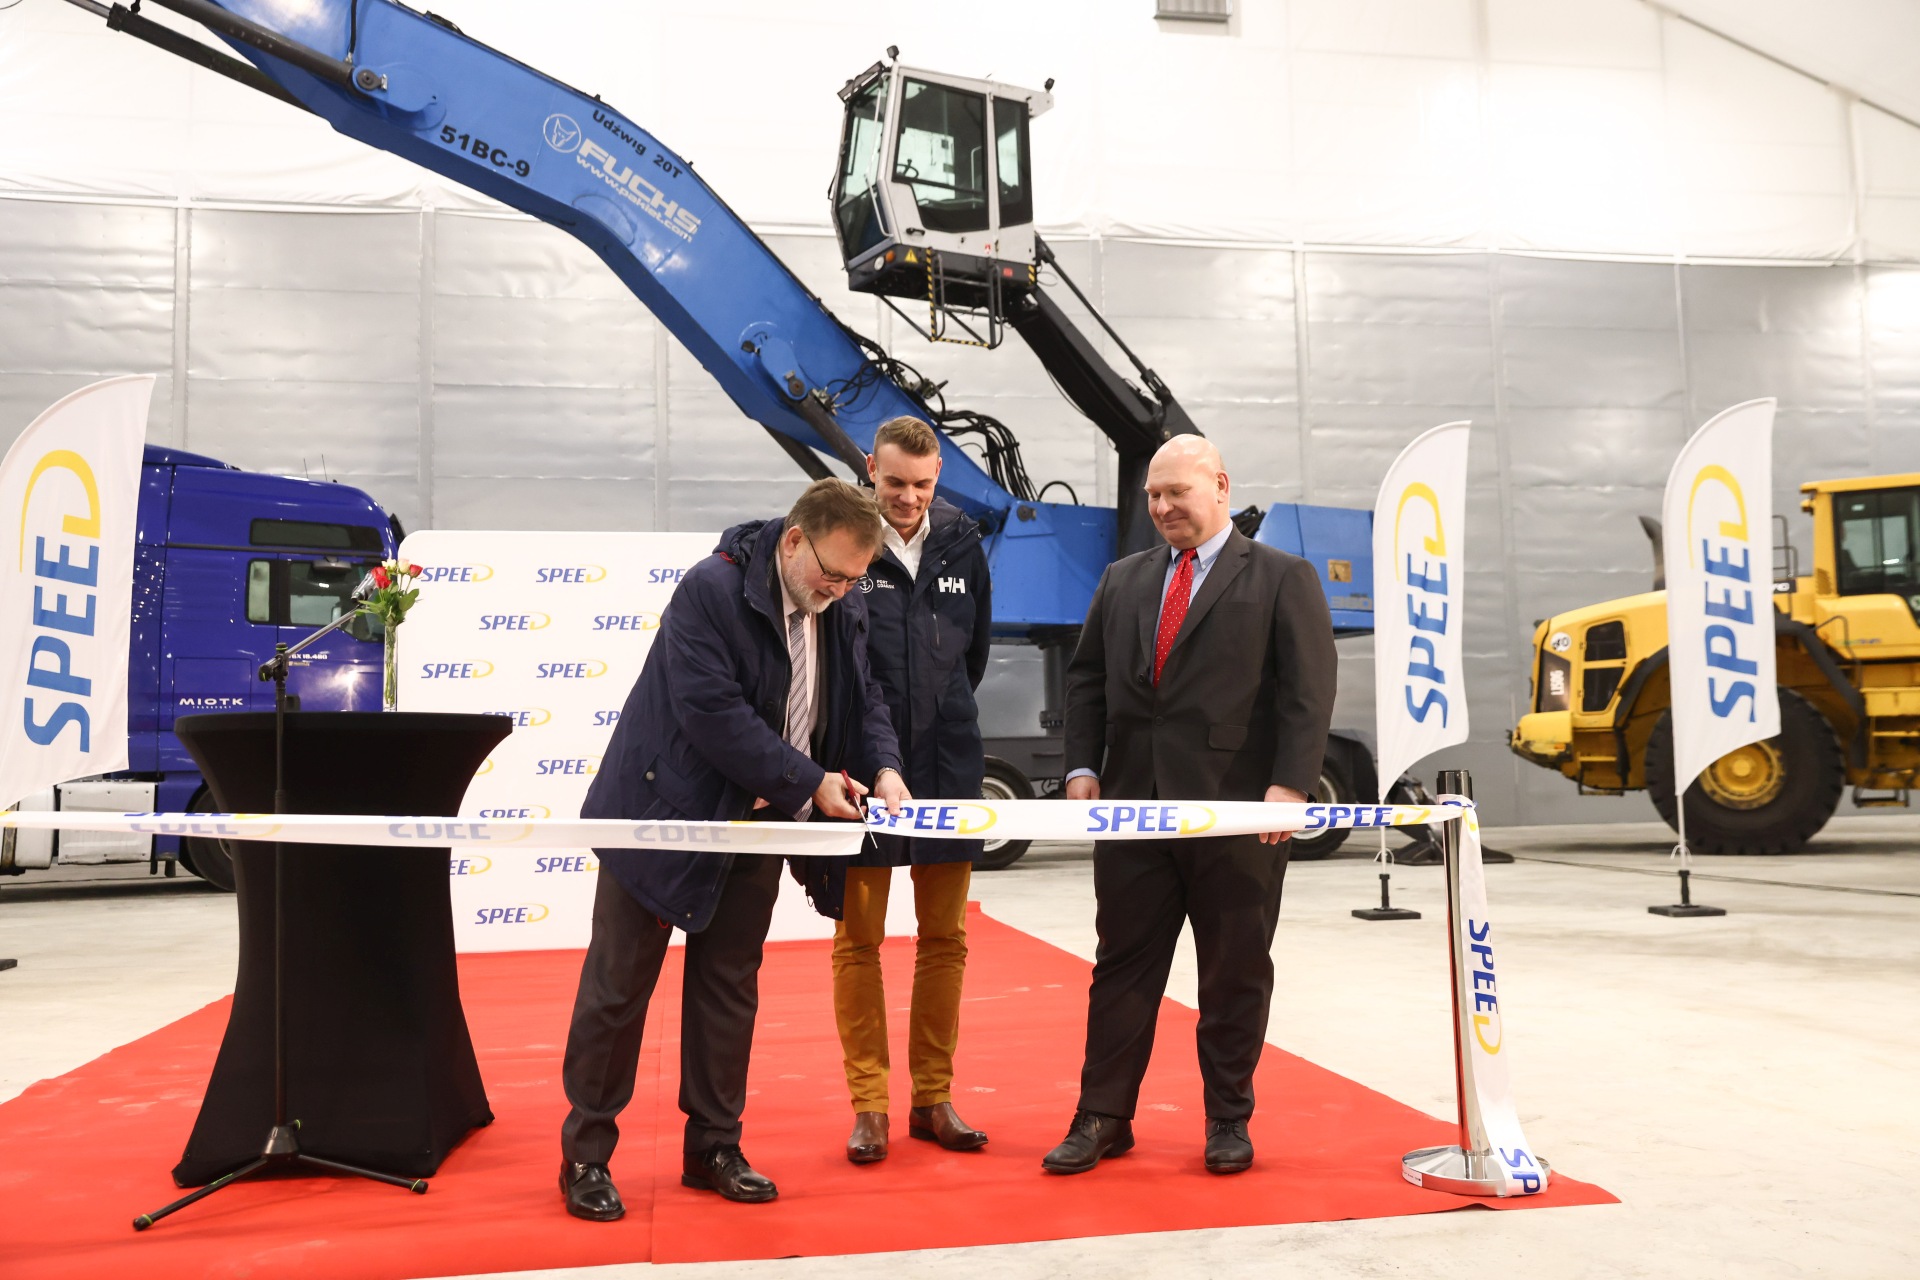 Speed opens a grain transhipment warehouse at the Port of Gdańsk - MarinePoland.com